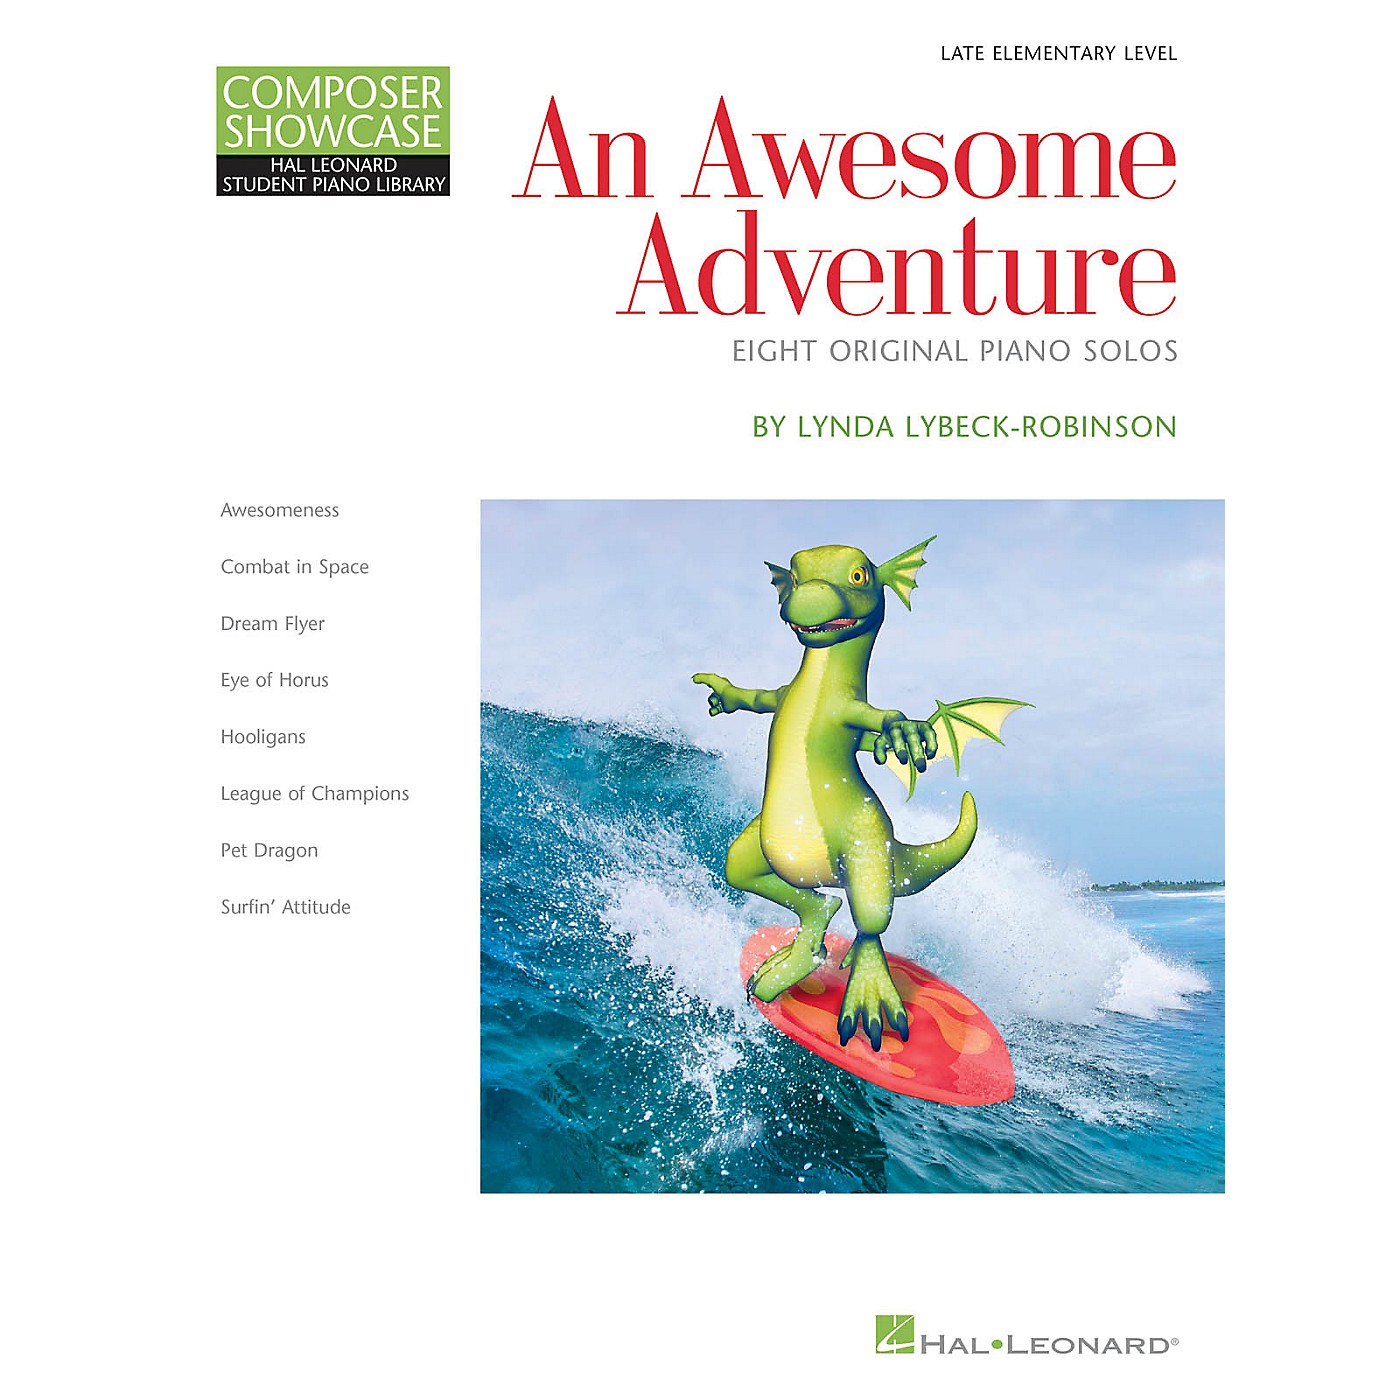 Hal Leonard An Awesome Adventure Piano Library Series Book by Lynda Lybeck-Robinson (Level Book 3) thumbnail